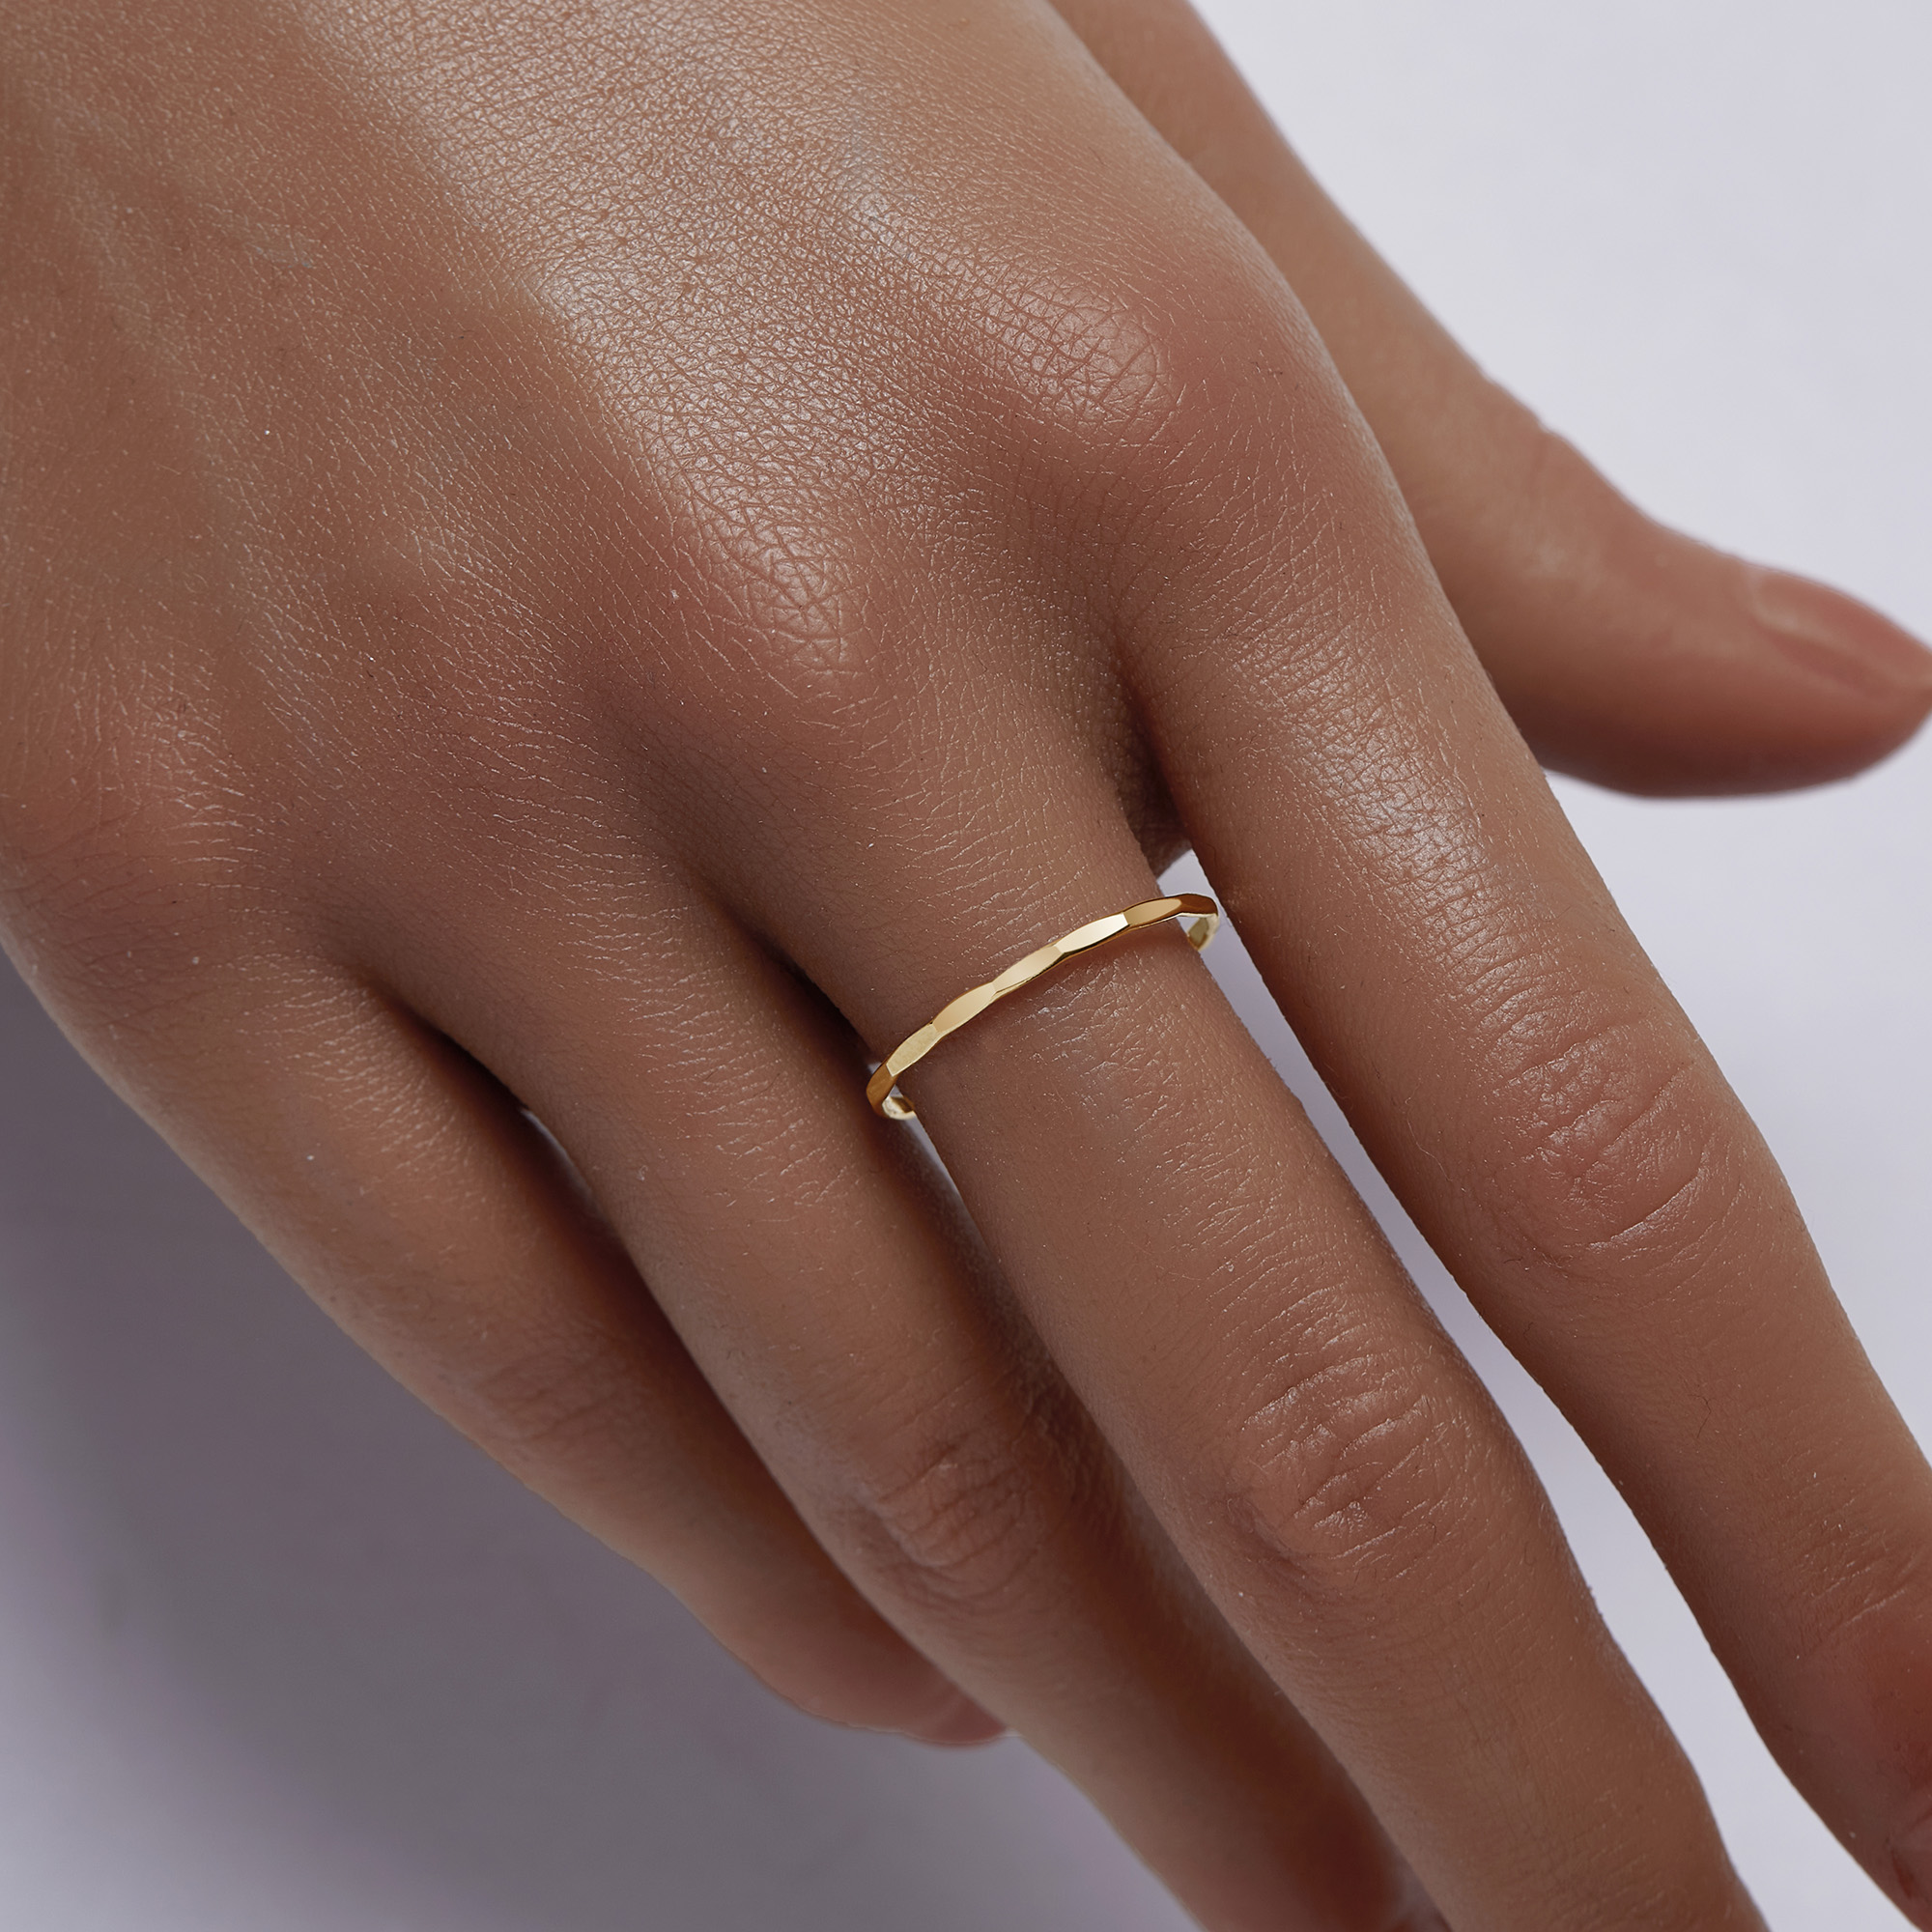 1PCS 1.4MM Hammered Faceted 14K Gold Filled Ring,Minimalist Ring,Gold Filled Slim Band Ring,Stackable Ring,DIY Ring Supplies 1294733 - Click Image to Close